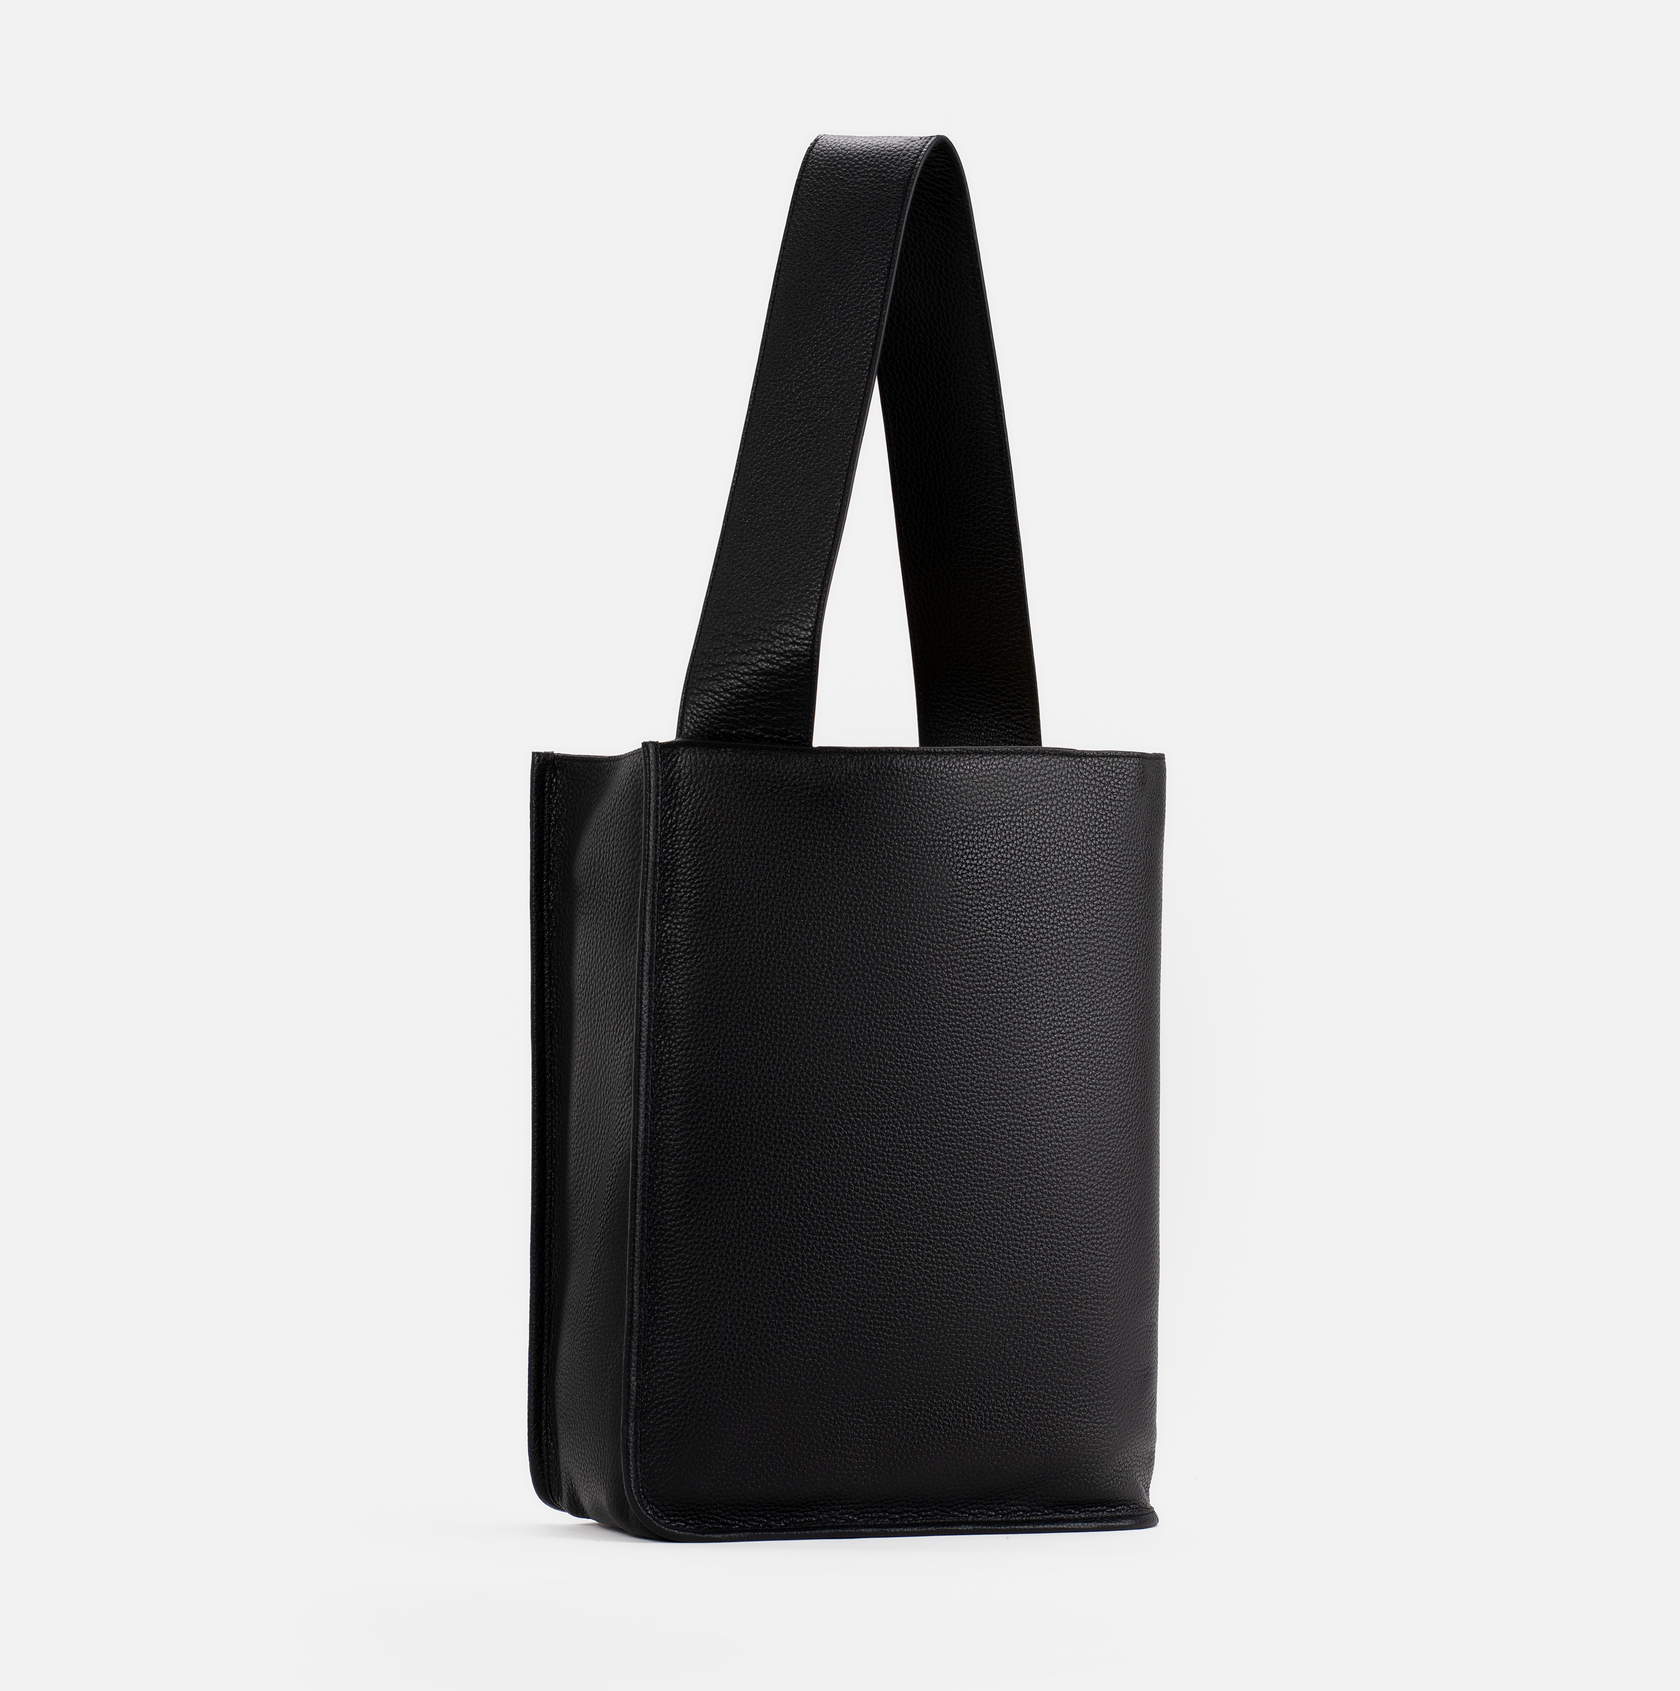 ro Bags | Design with a purpose | Leather Bags & Accessories - ro bags